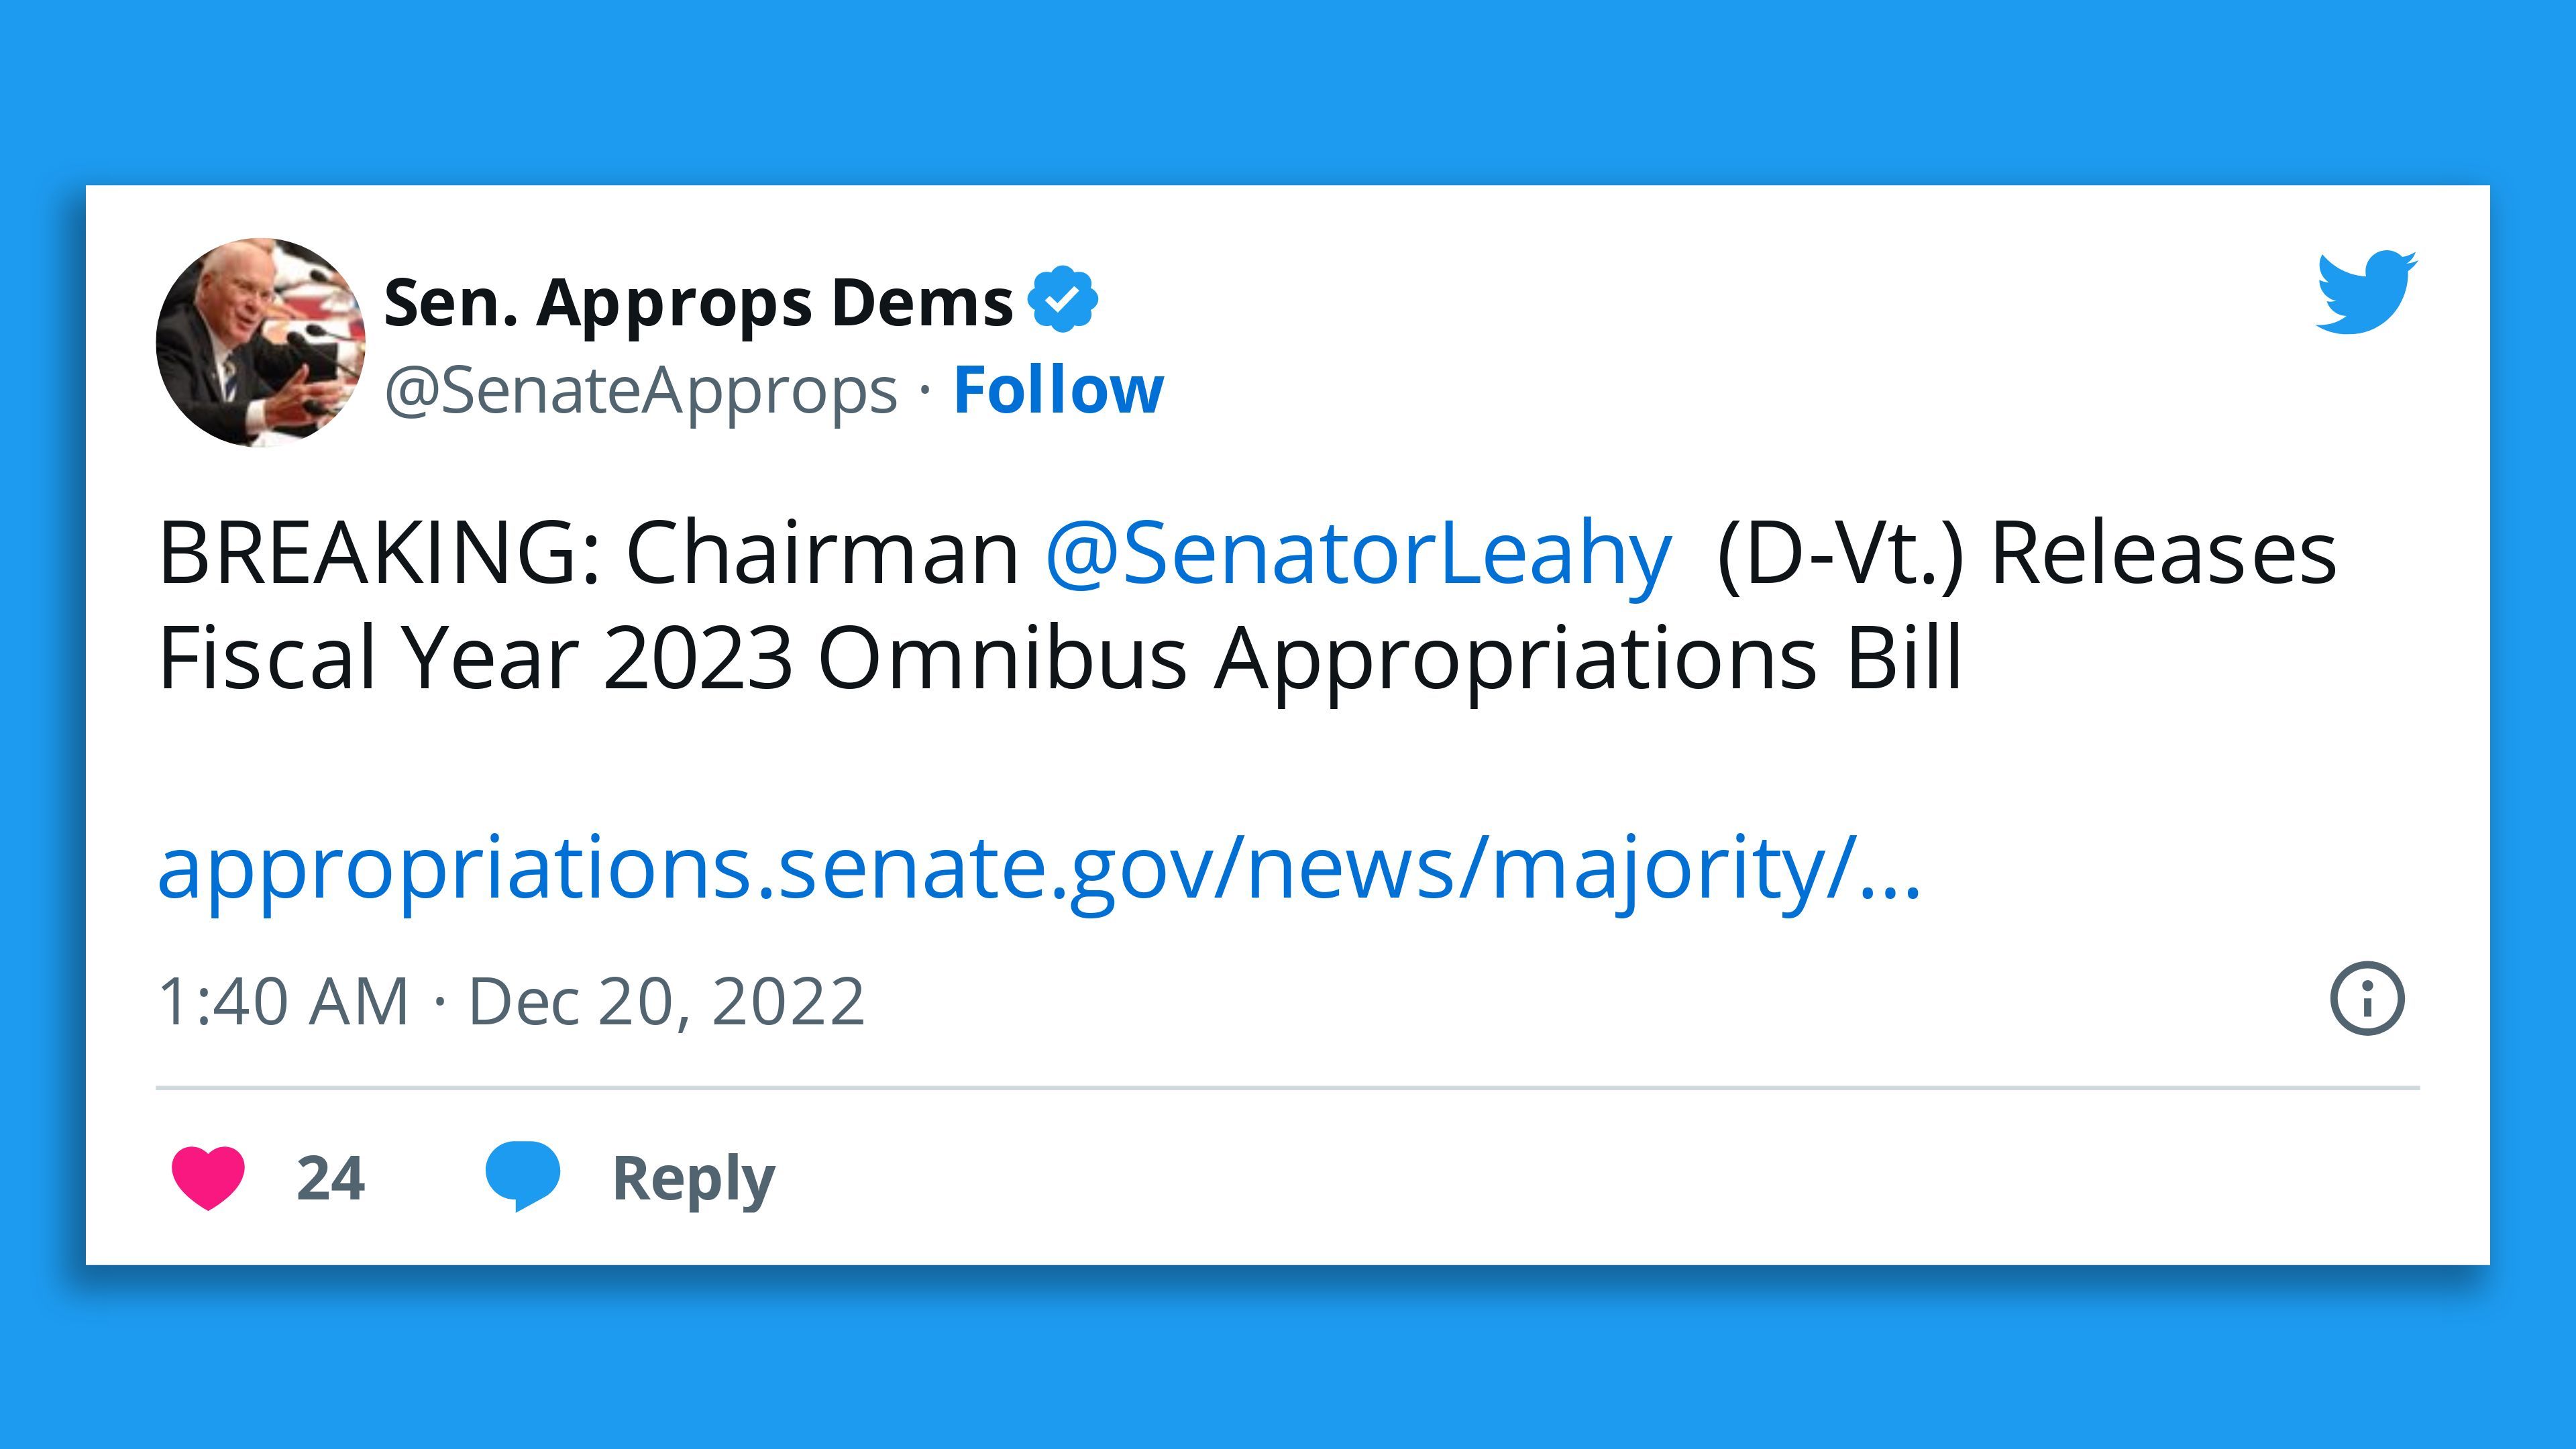 A tweet from the Senate Appropriations Democrats announcing the spending package deal.